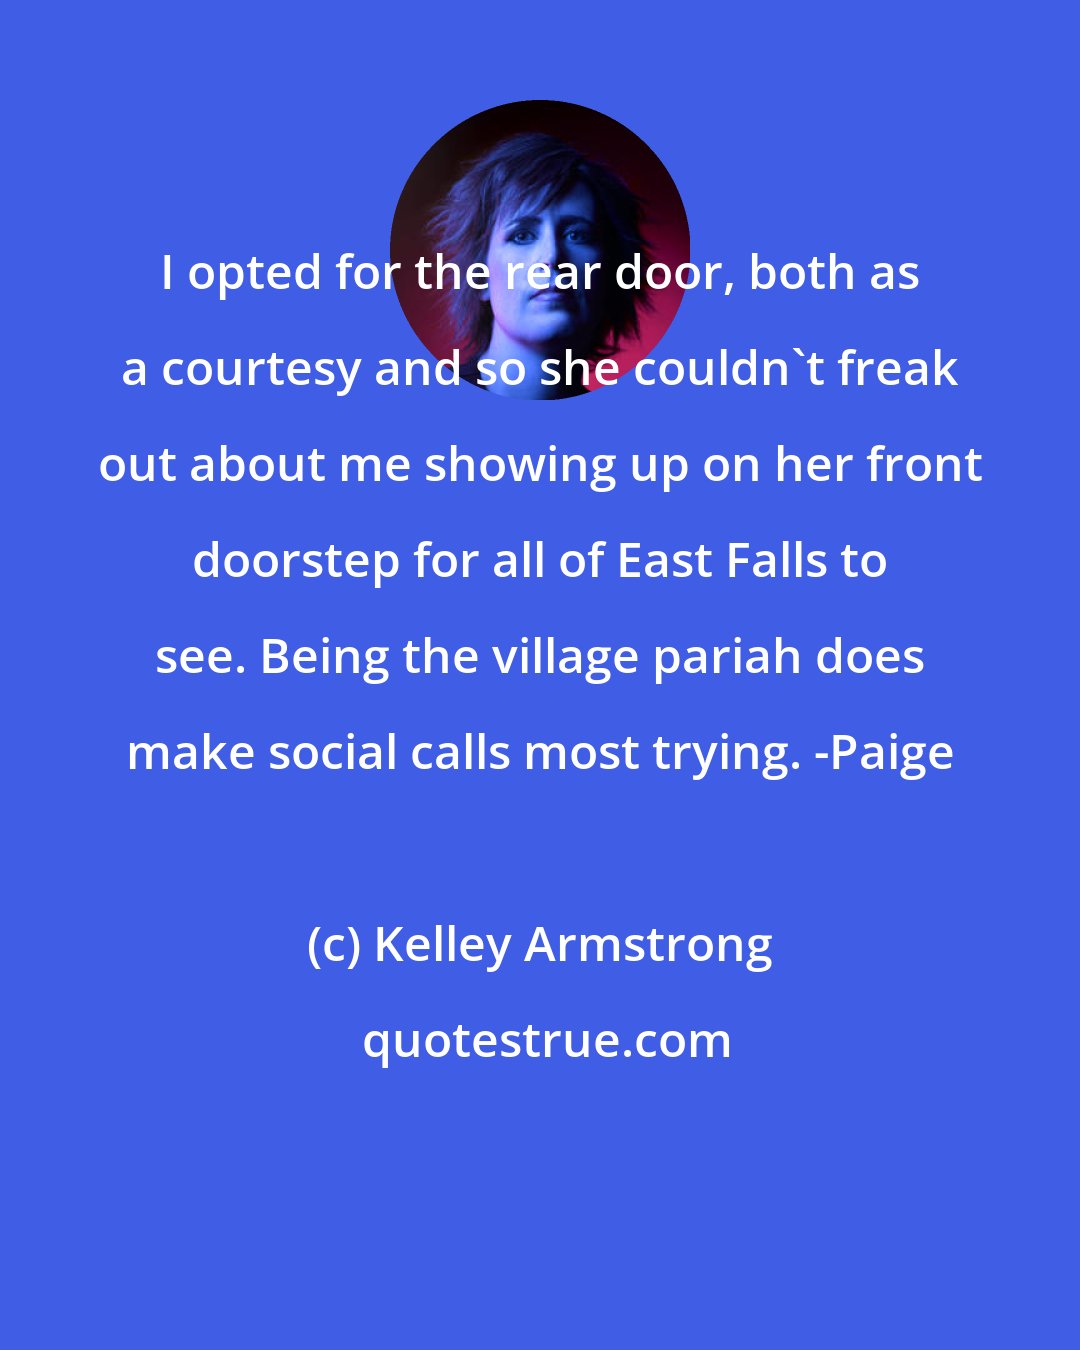 Kelley Armstrong: I opted for the rear door, both as a courtesy and so she couldn't freak out about me showing up on her front doorstep for all of East Falls to see. Being the village pariah does make social calls most trying. -Paige